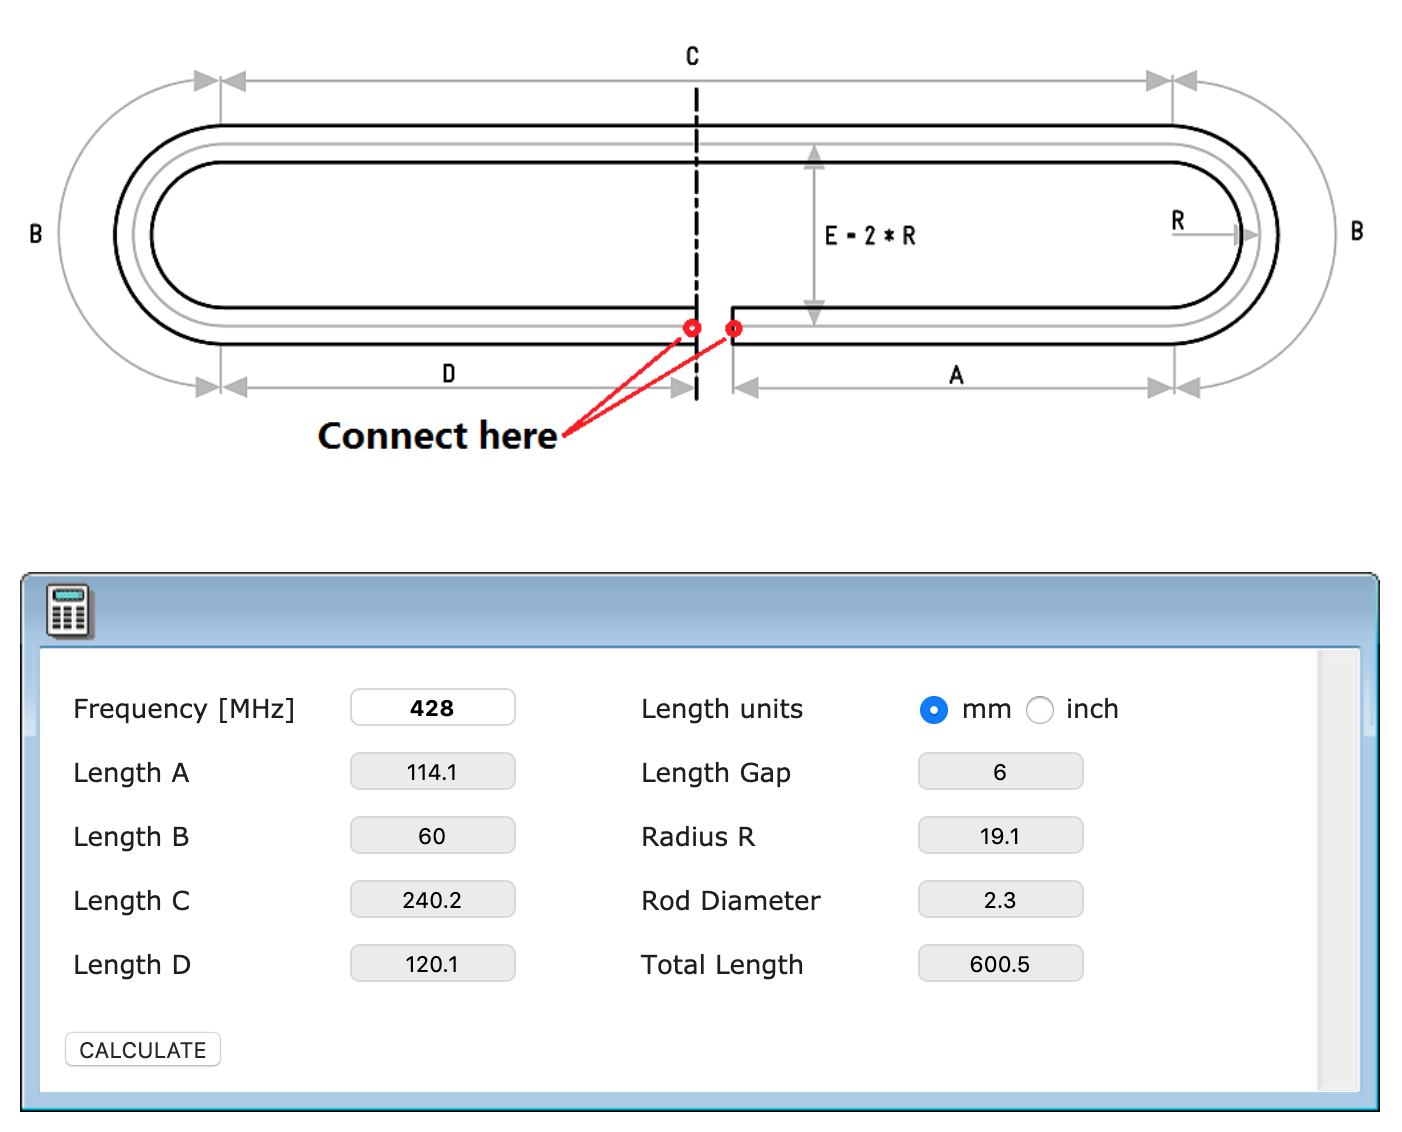 Screenshot of an online tool showing an example of the dimensions for a folded dipole, photo credit: screenshot of https://www.changpuak.ch/electronics/Dipole_folded.php